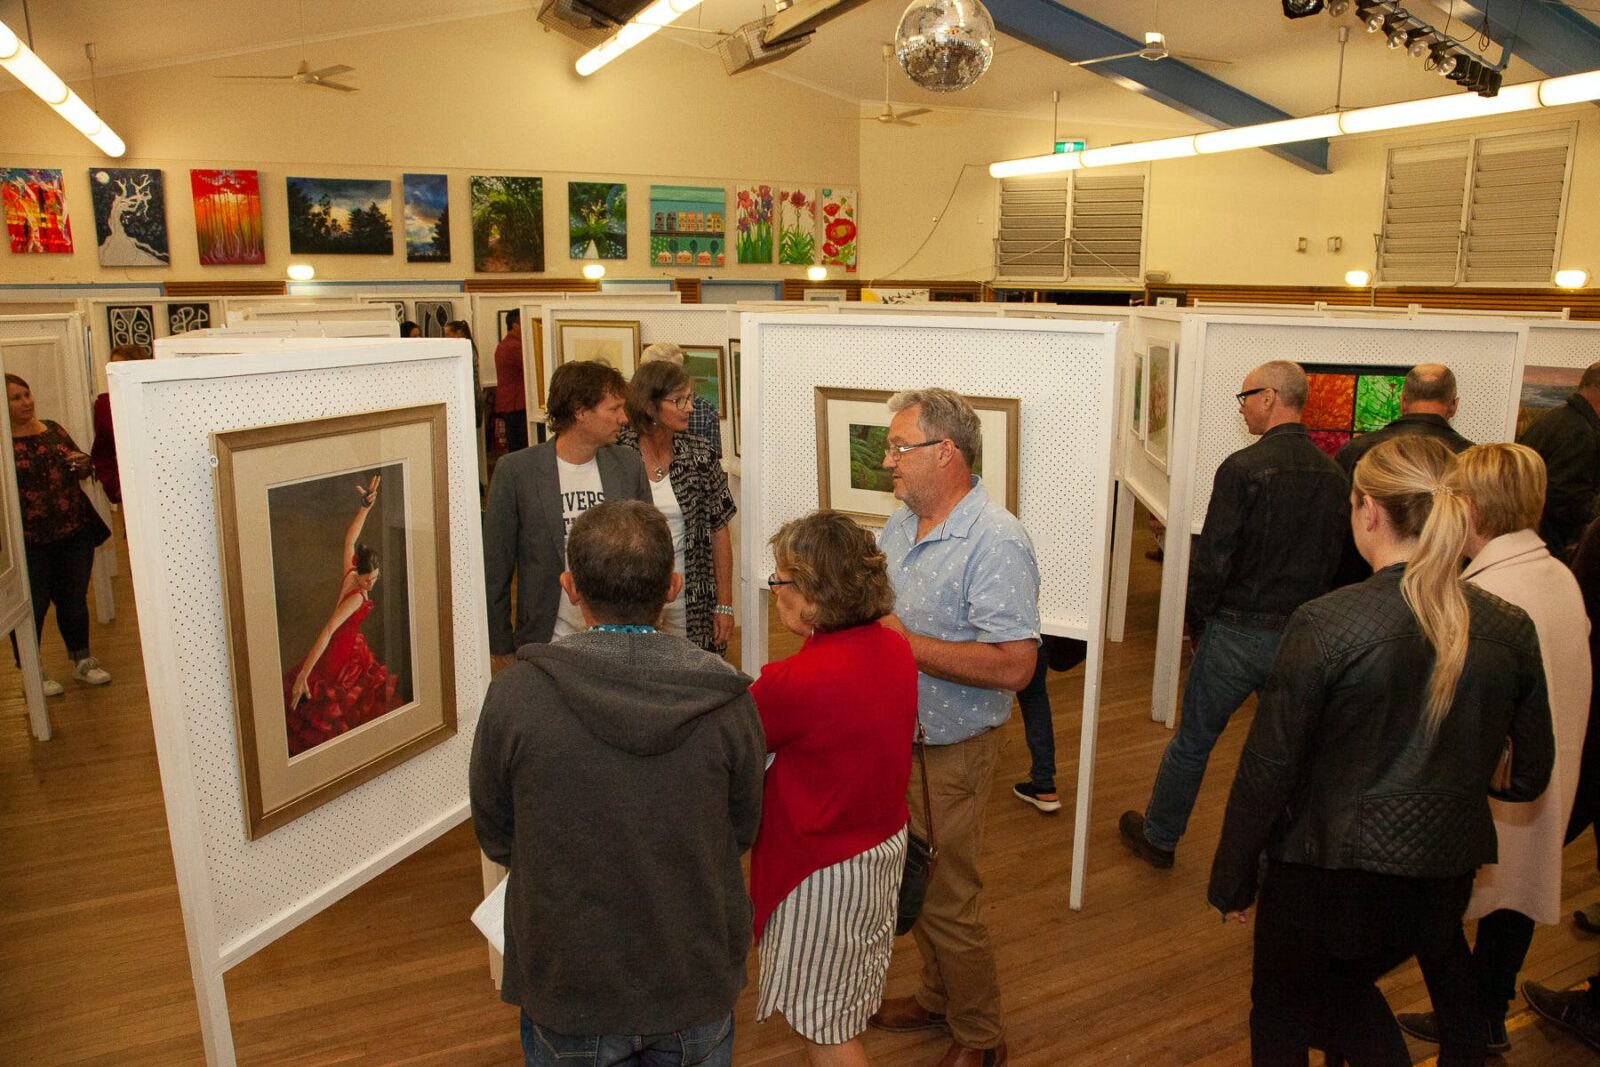 Wentworth Falls School Hall used as an art gallery. Art is displayed on Art Boards & adults browsing